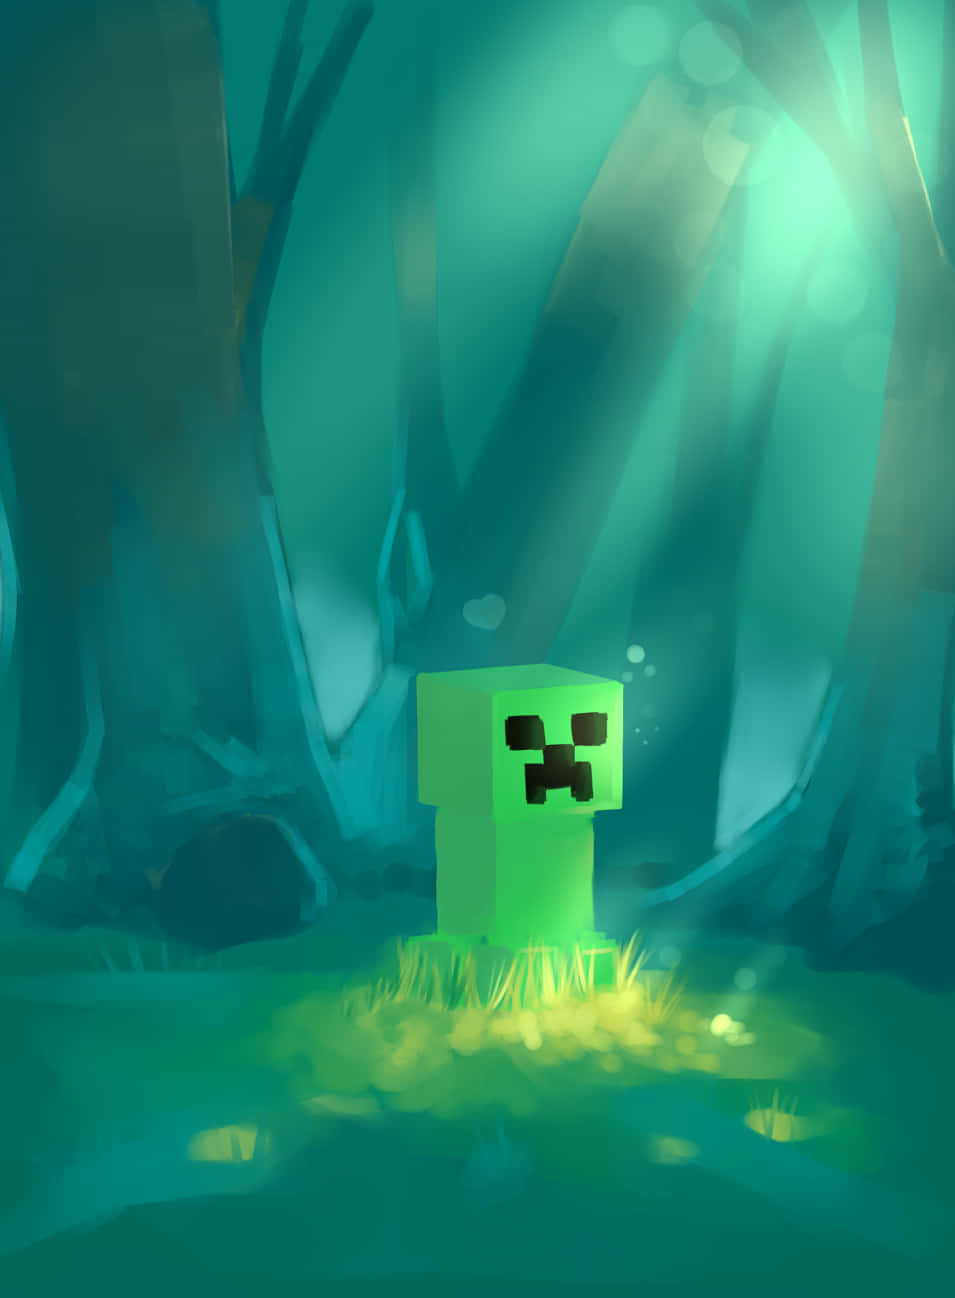 Epic Minecraft Fan Art featuring a vibrant, beautifully crafted landscape Wallpaper